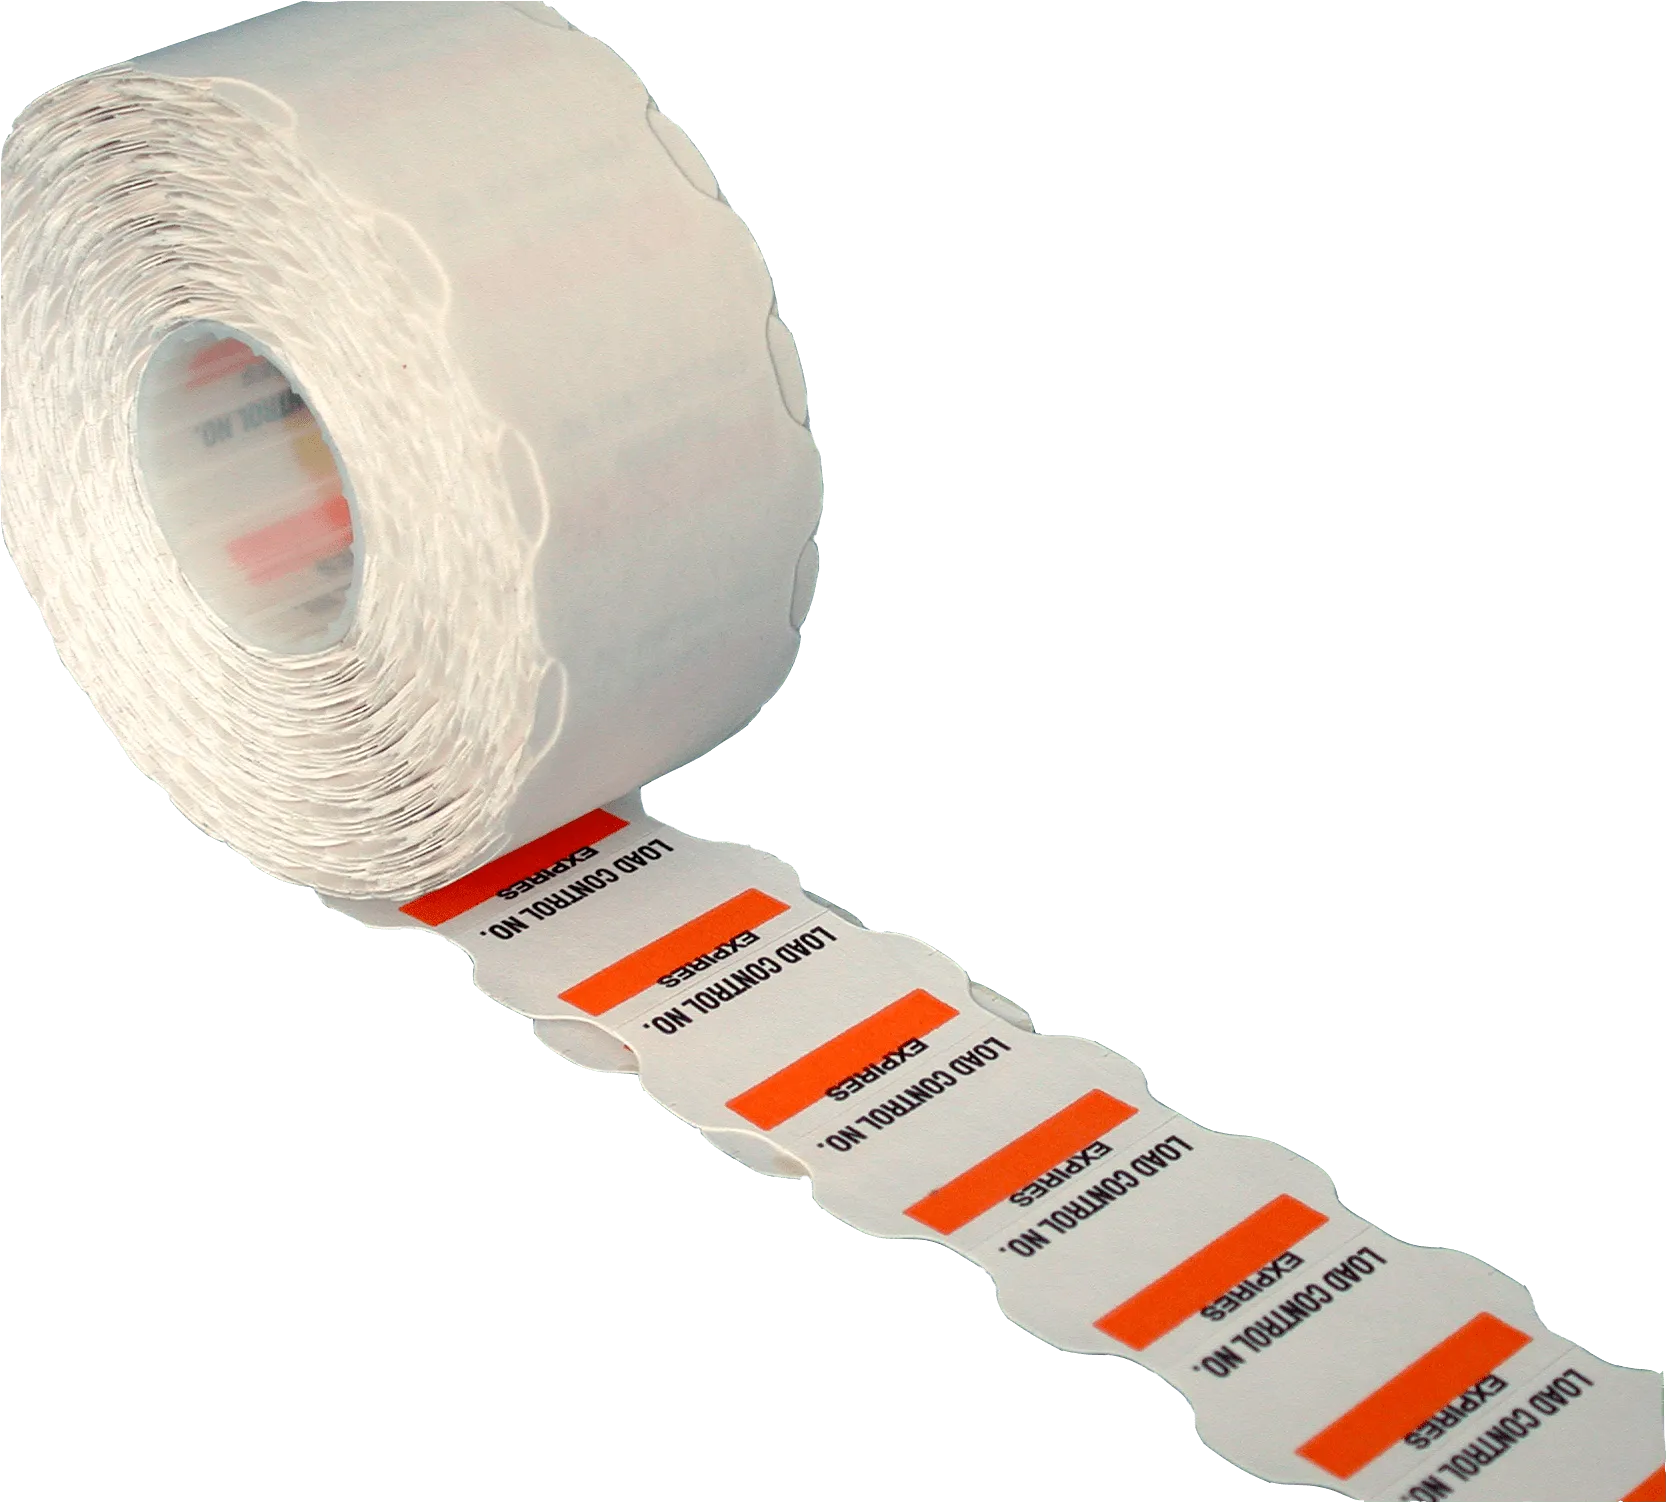 Propper - From: 26908000 To: 26908300 - Manufacturing Duo record White Record Keeping Labels Stripe